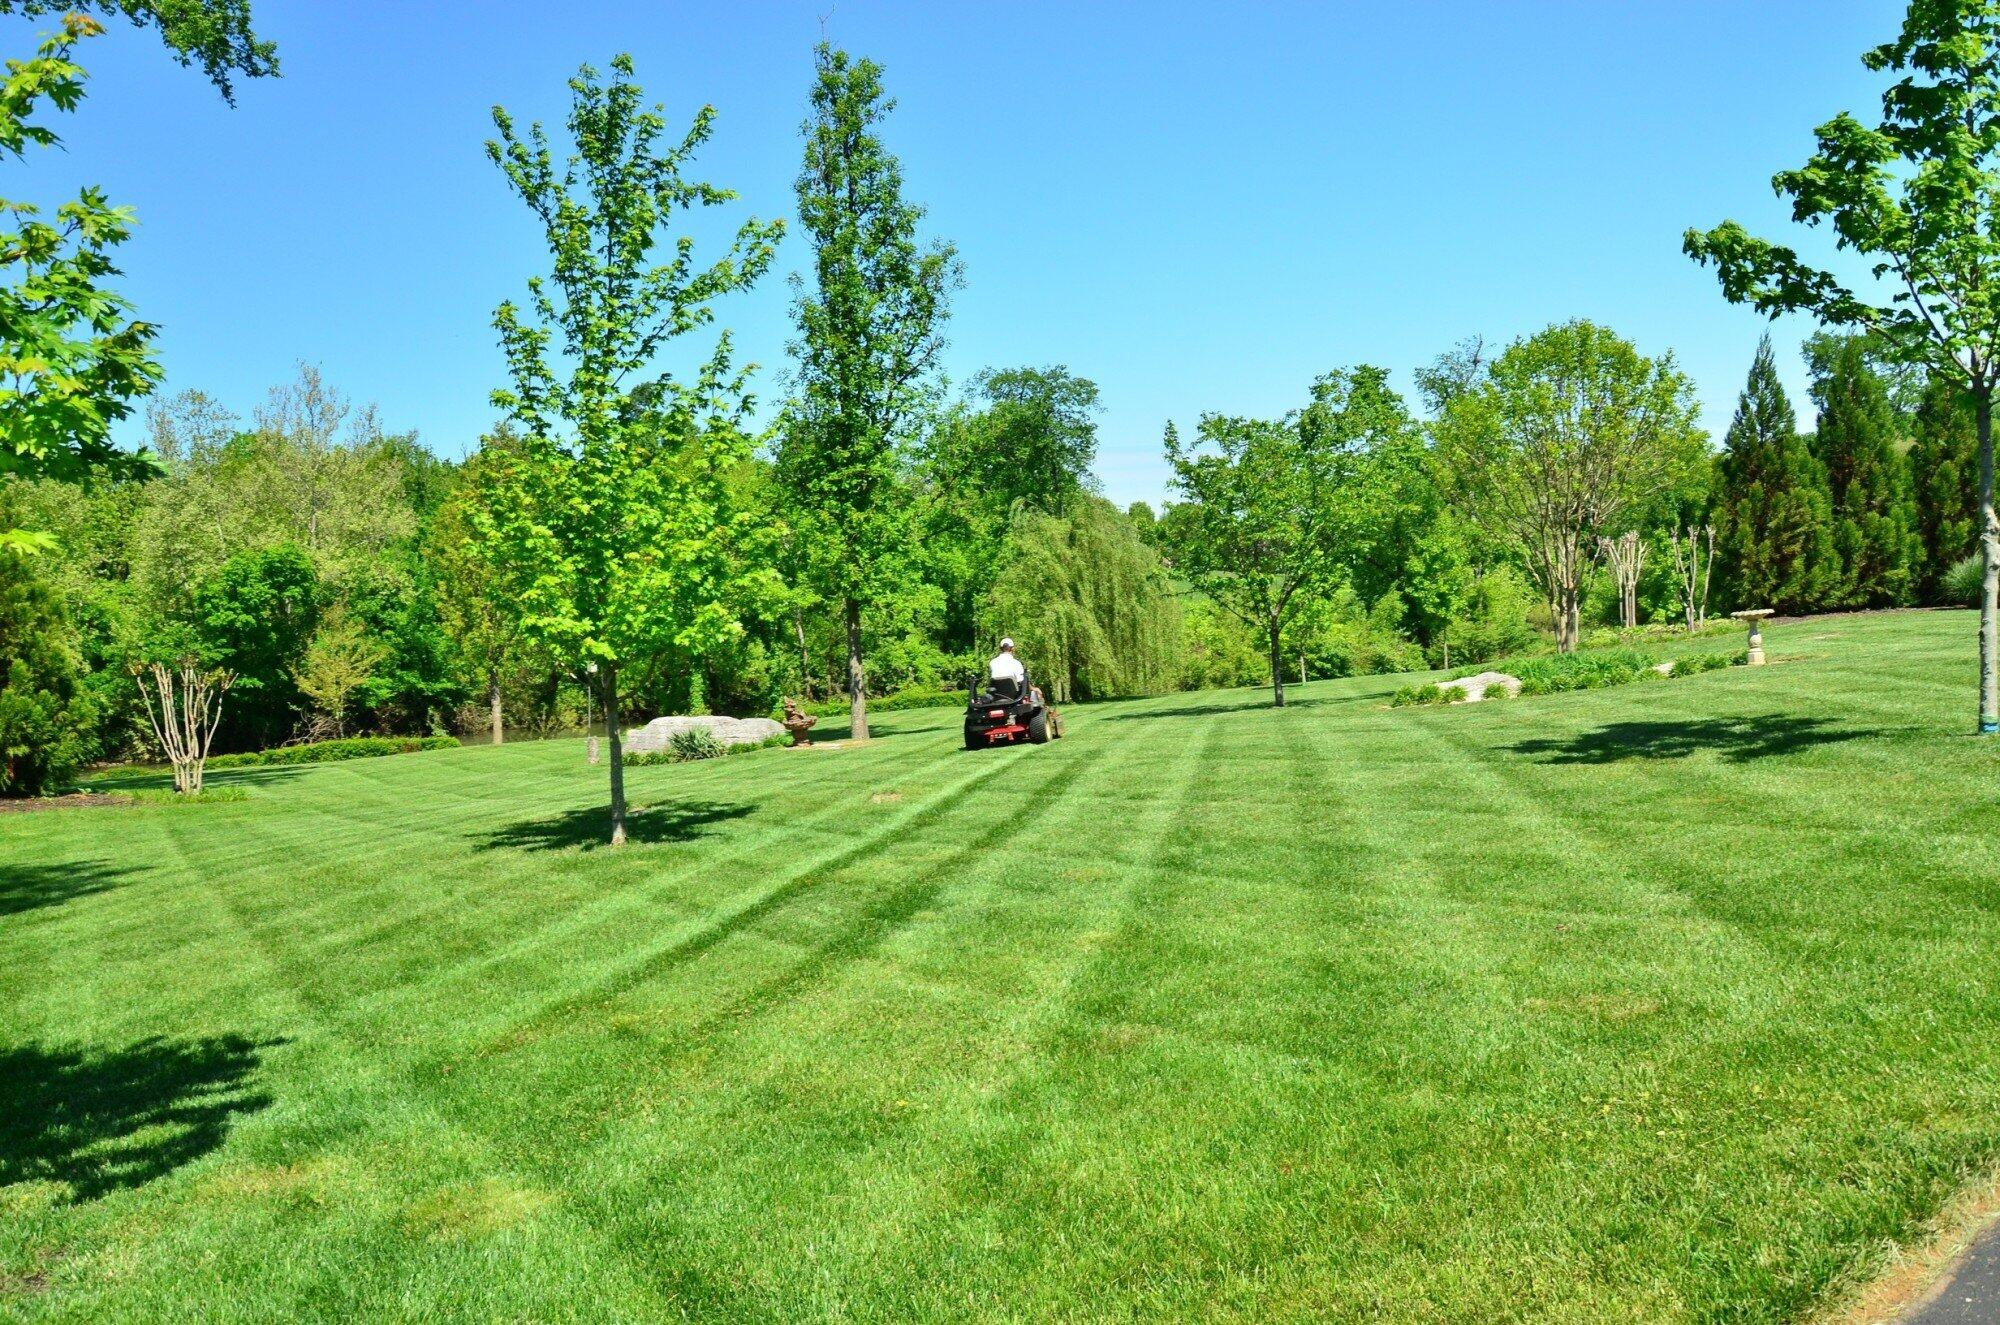 How to Measure Lawn Square Footage for a Better Home Listing